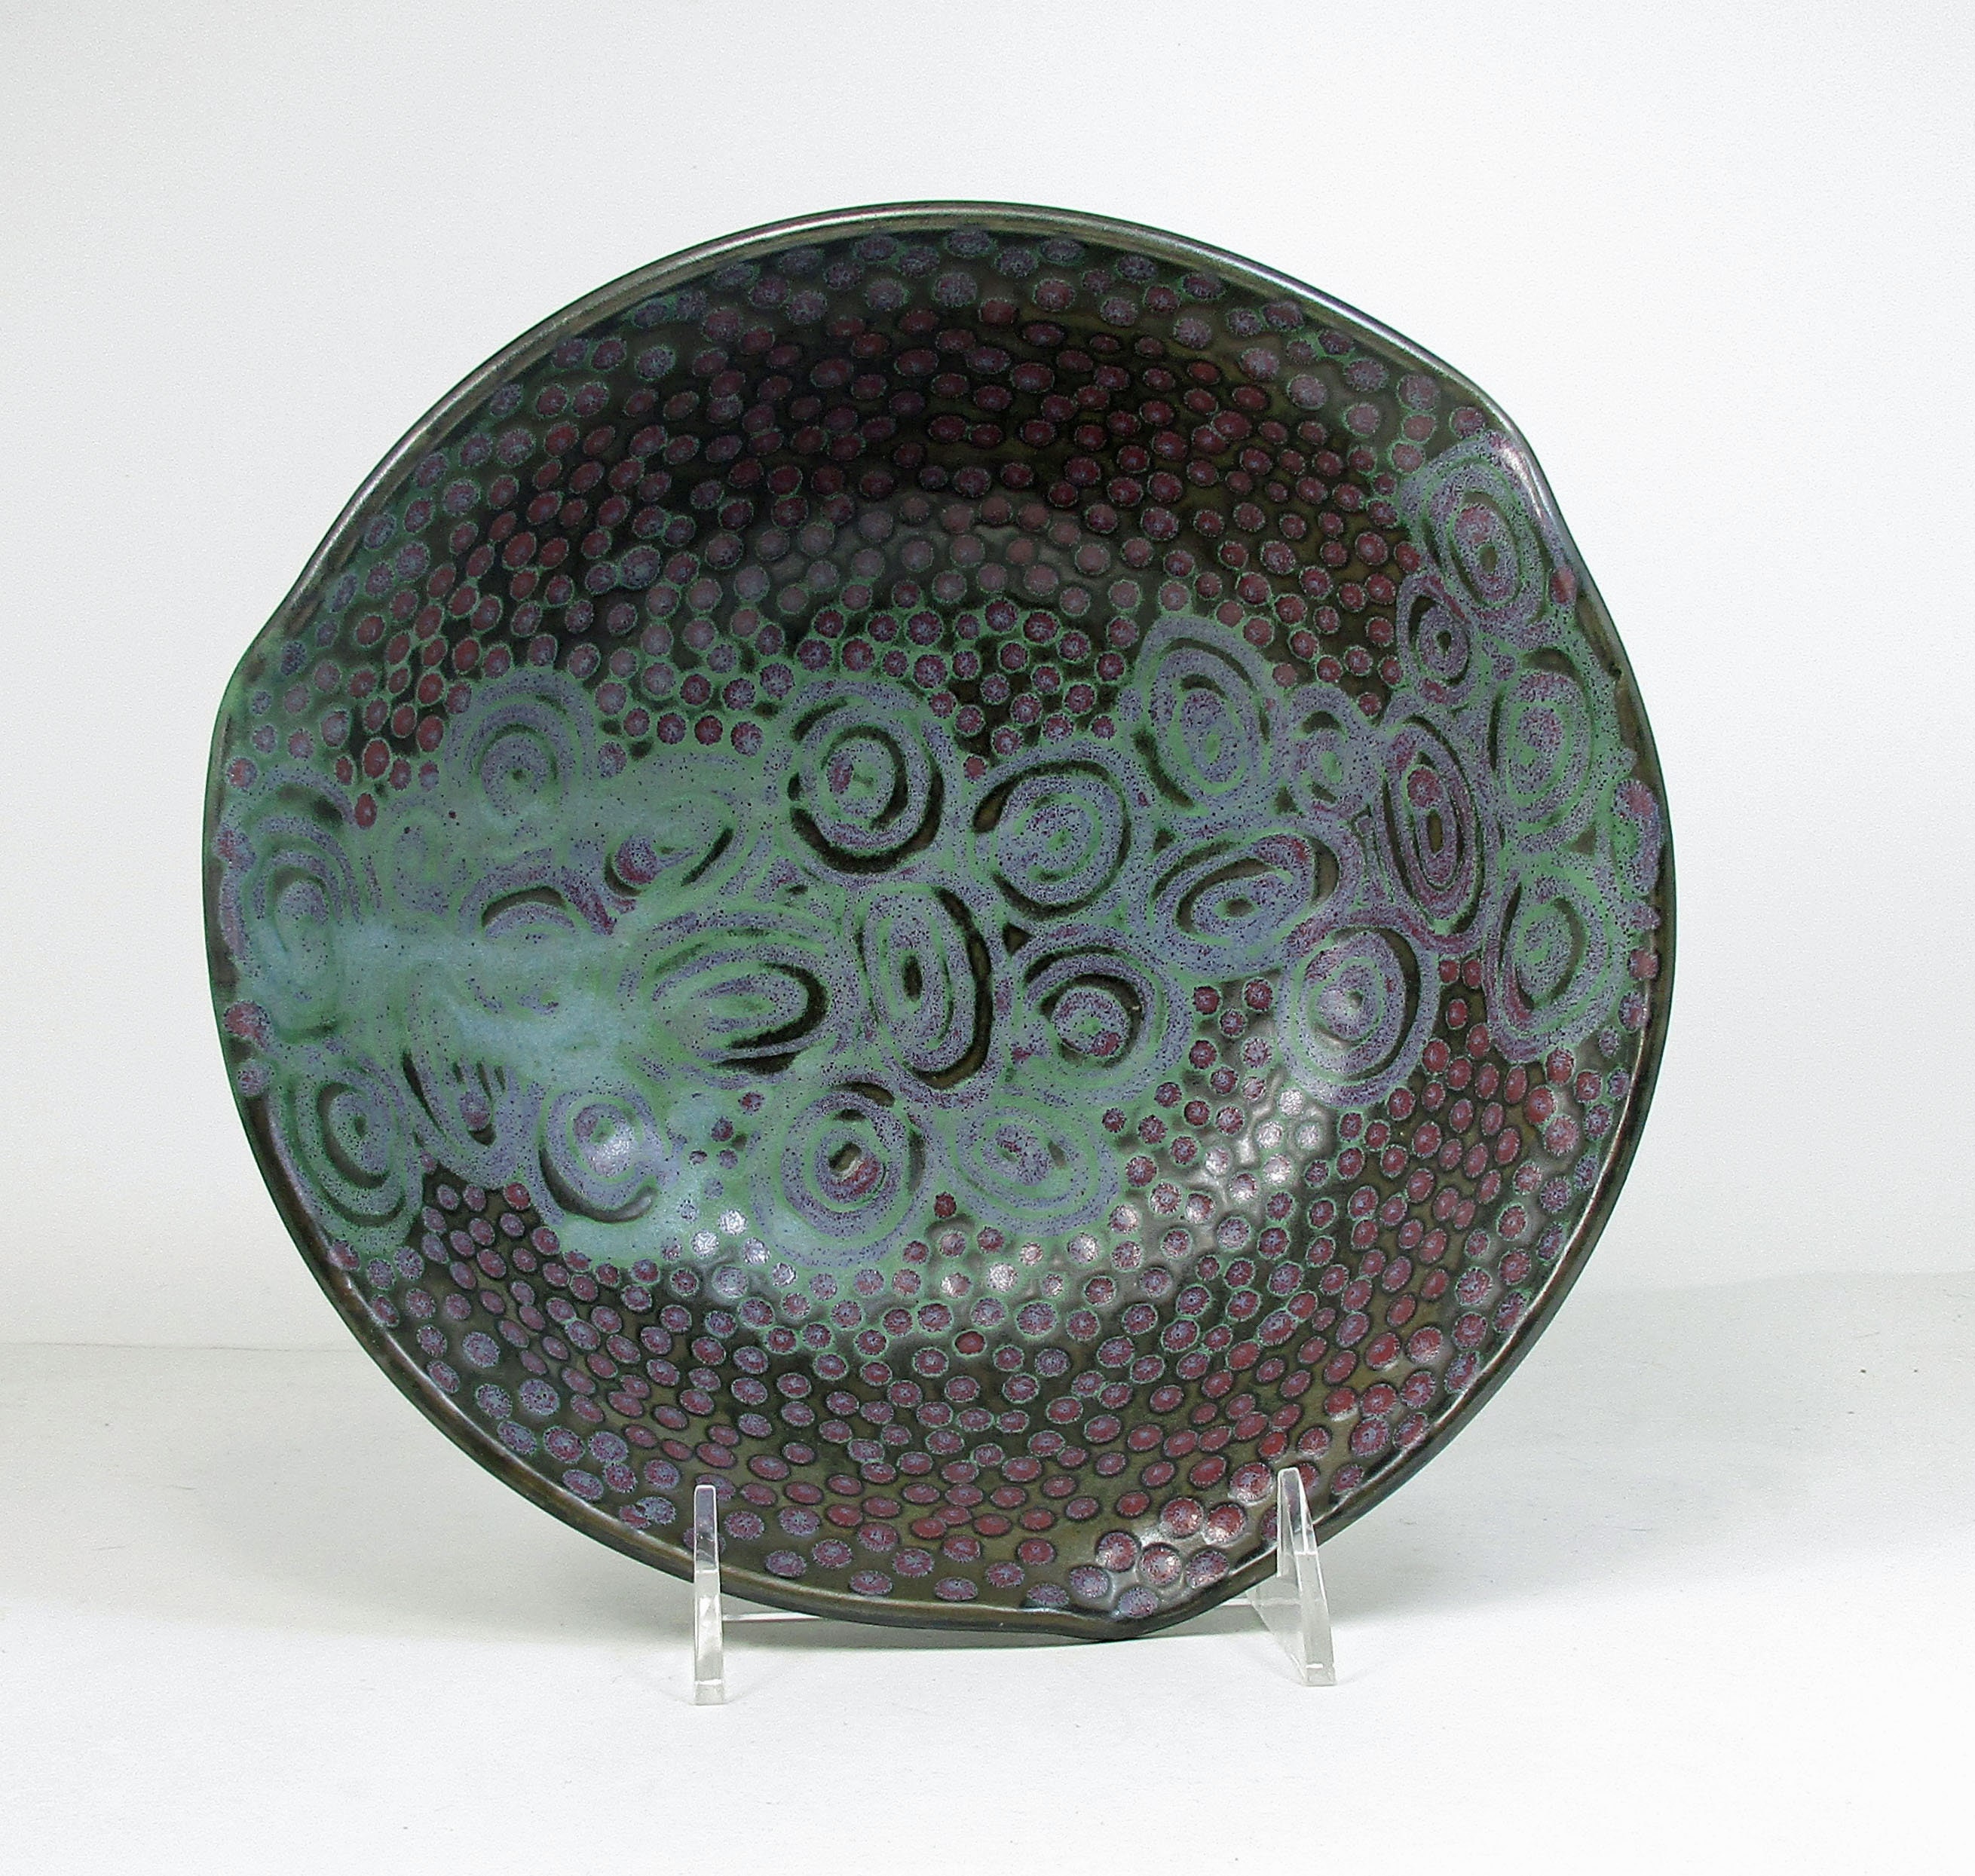 Ceramic Serving Bowl in Dark Green With Light Concentric Circles & Red Polka Dots